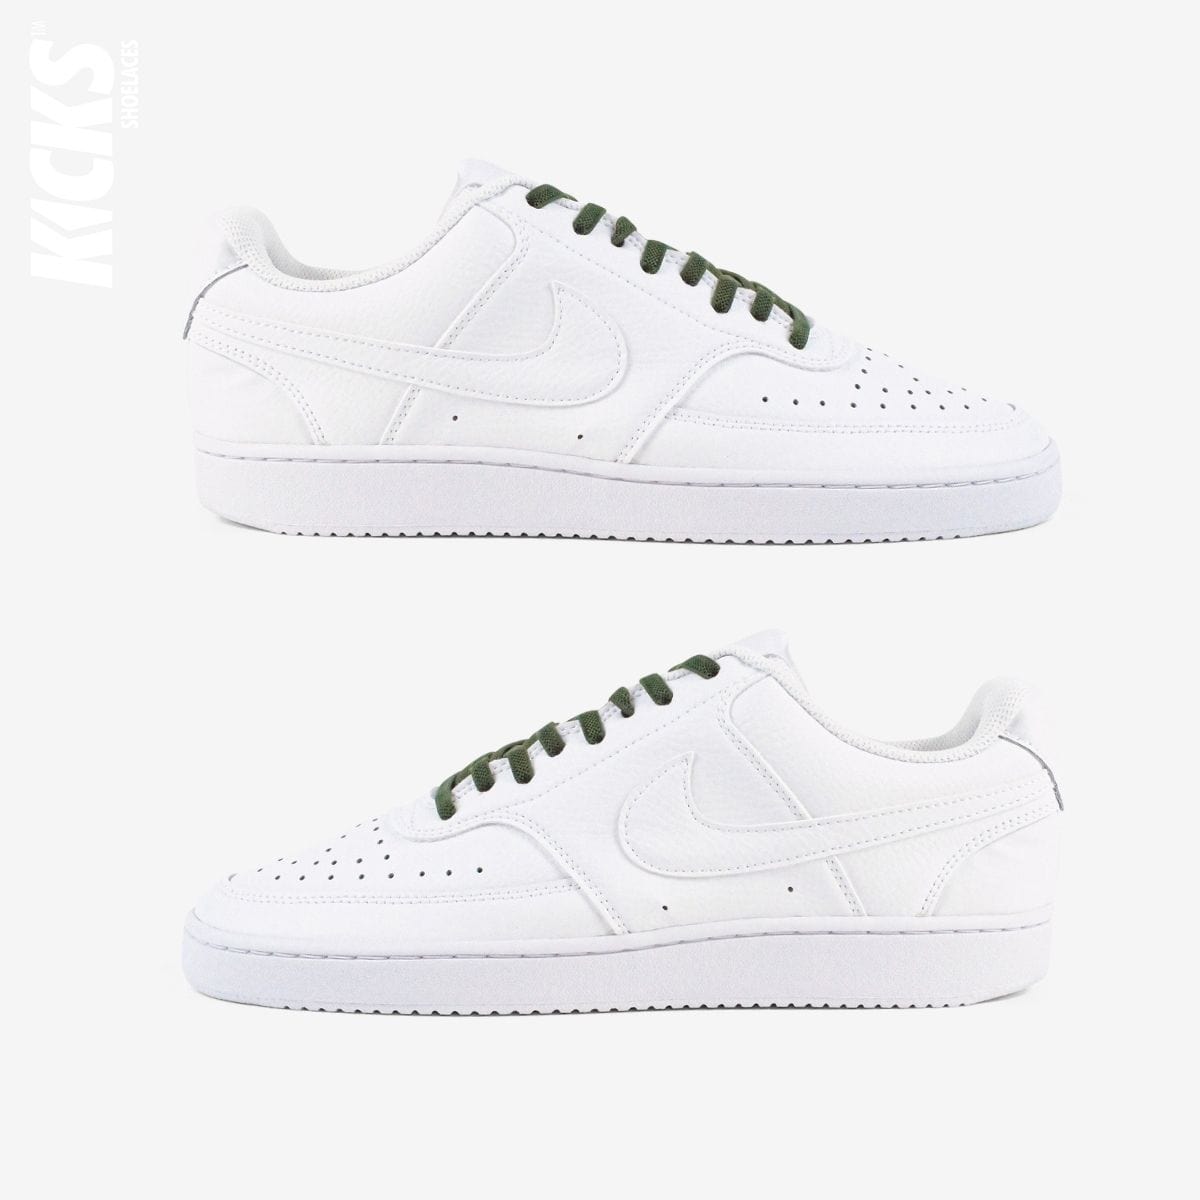 tieless-laces-with-army-green-laces-on-nike-white-sneakers-by-kicks-shoelaces